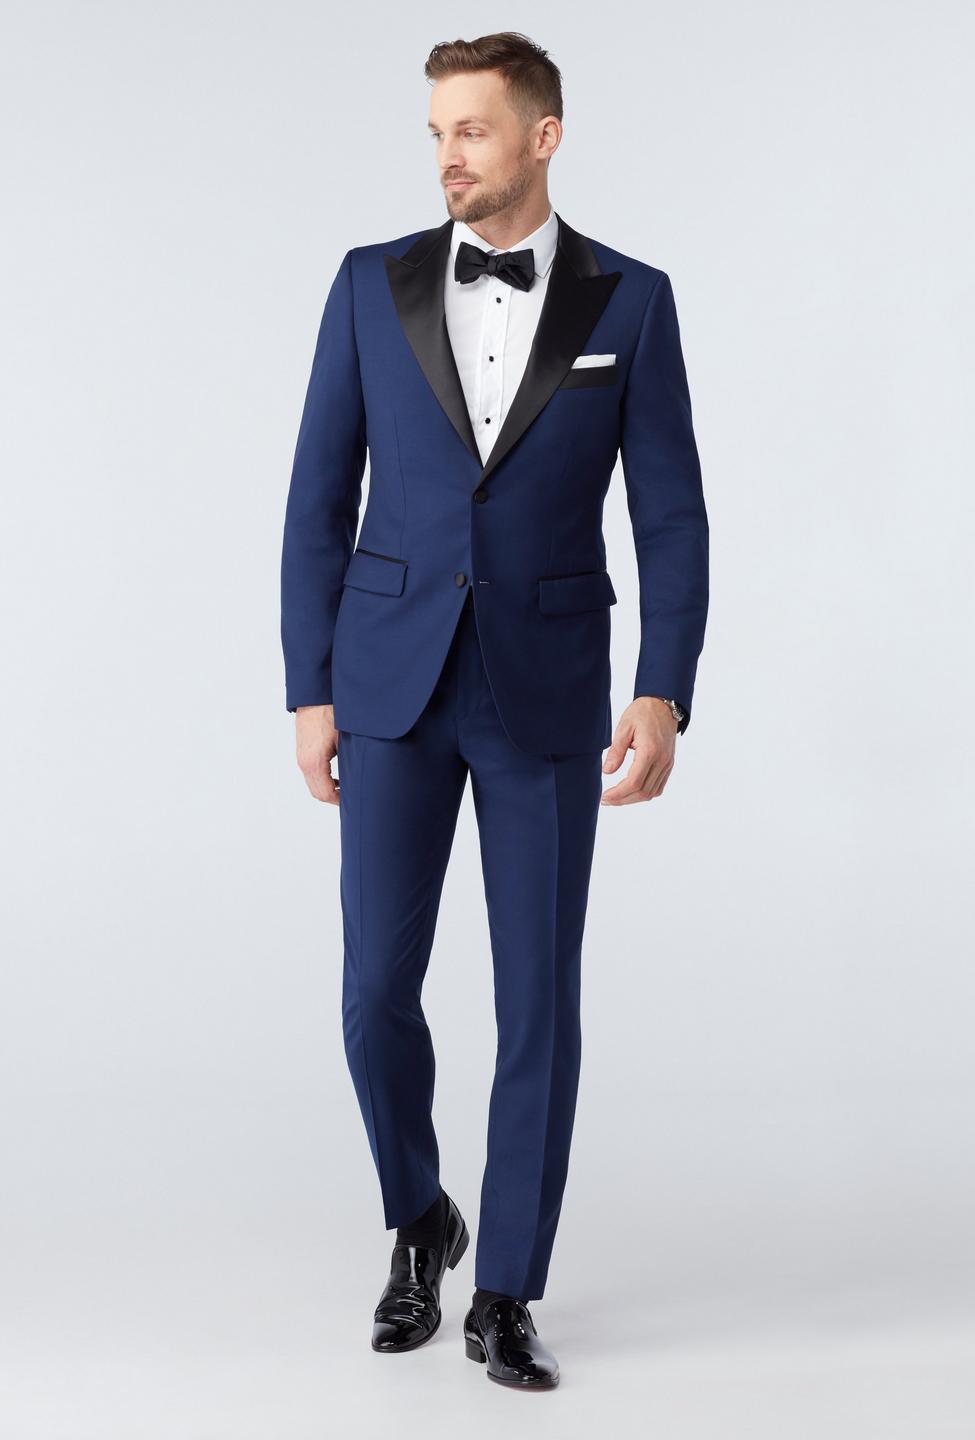 Navy suit - Highworth Solid Design from Tuxedo Indochino Collection